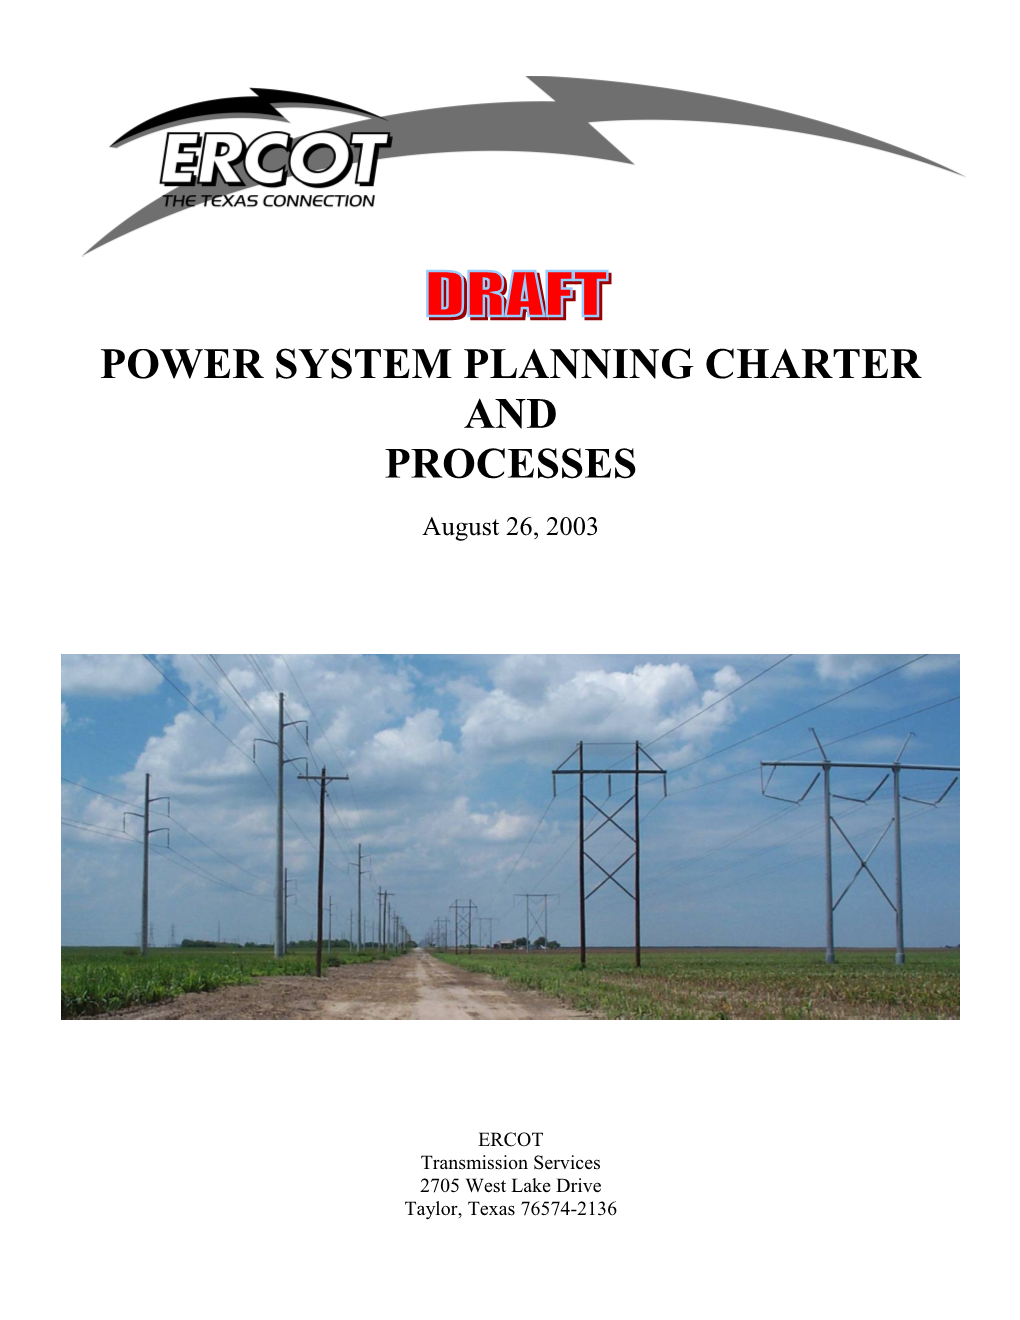 Power System Planning Charter & Processespage 1 of 18